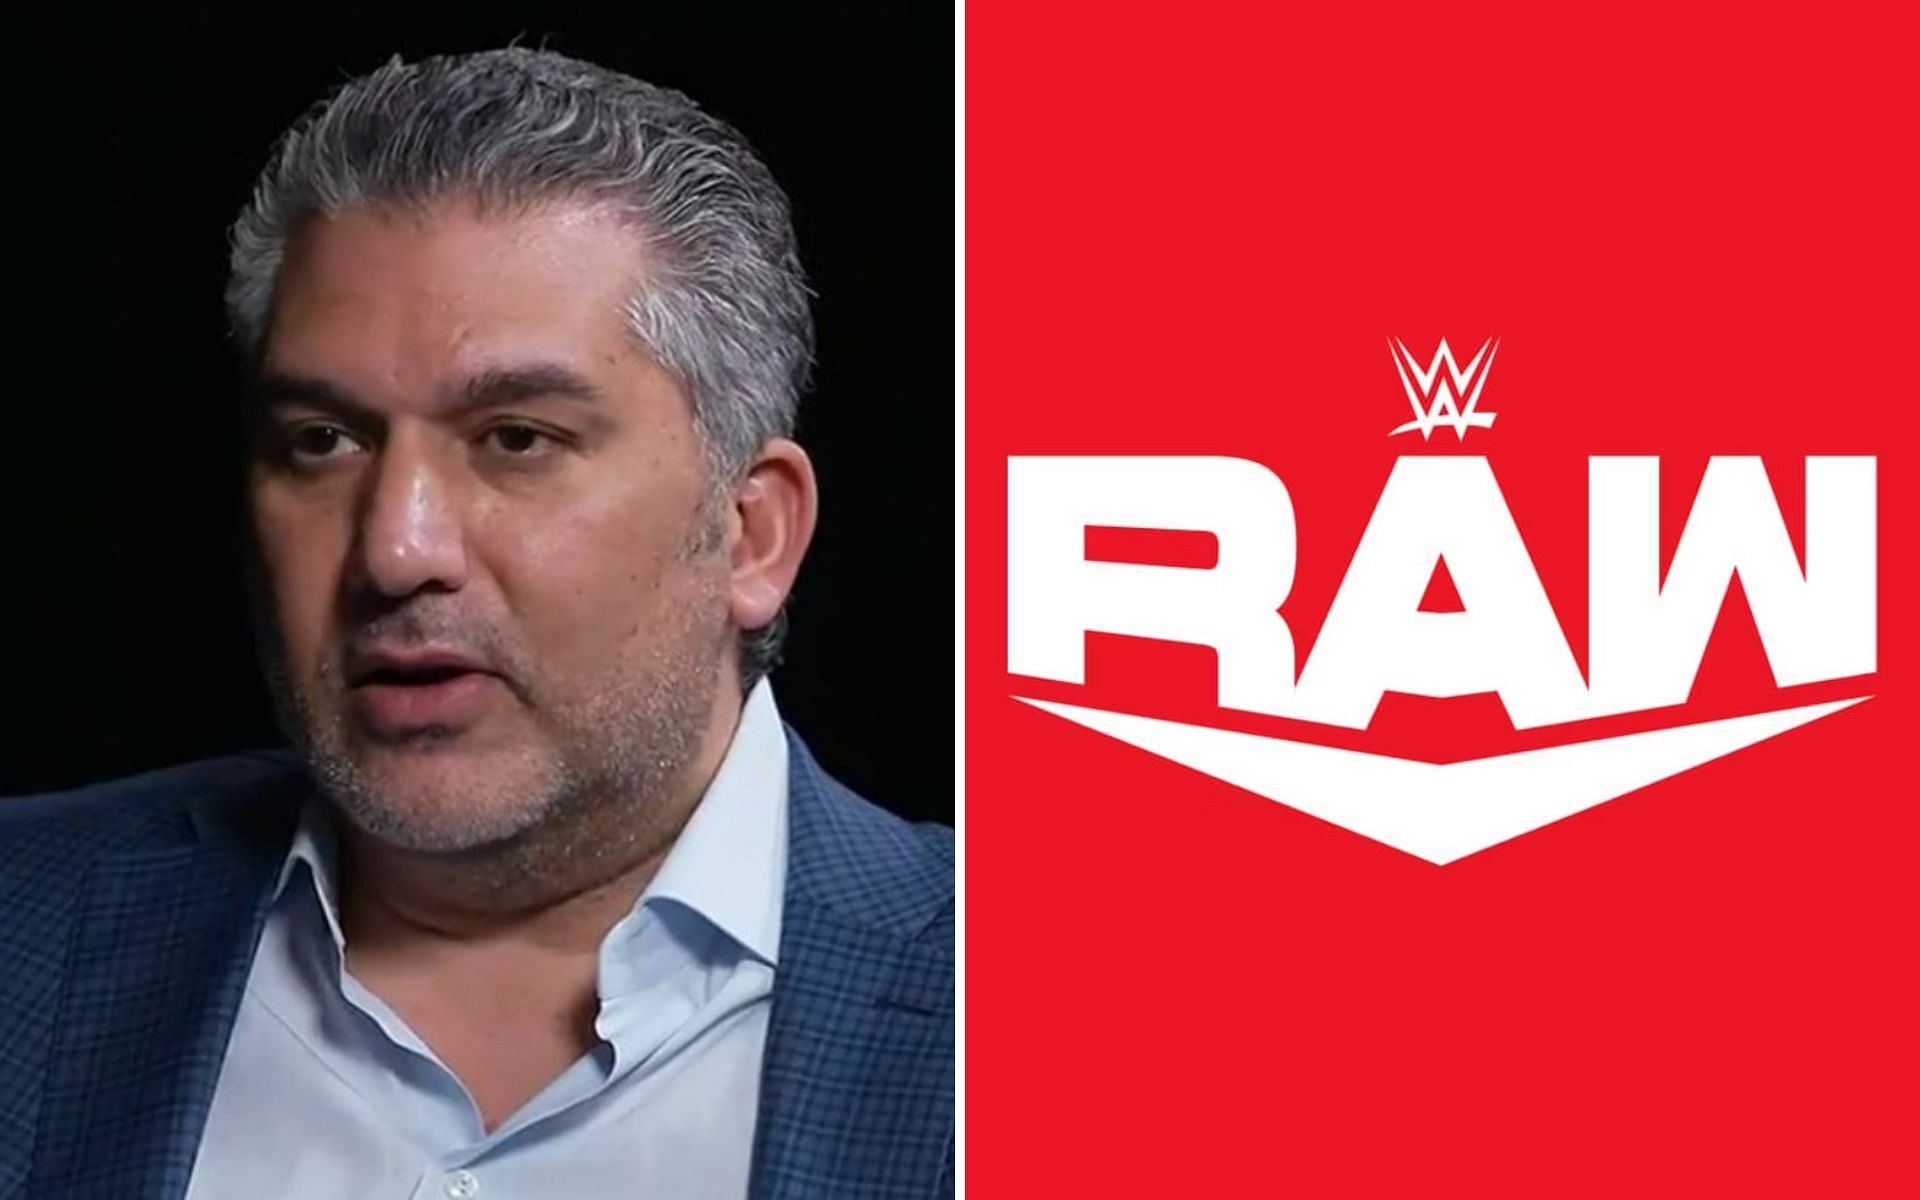 The co-CEO of WWE recently spoke in the Quarterly Earnings Call